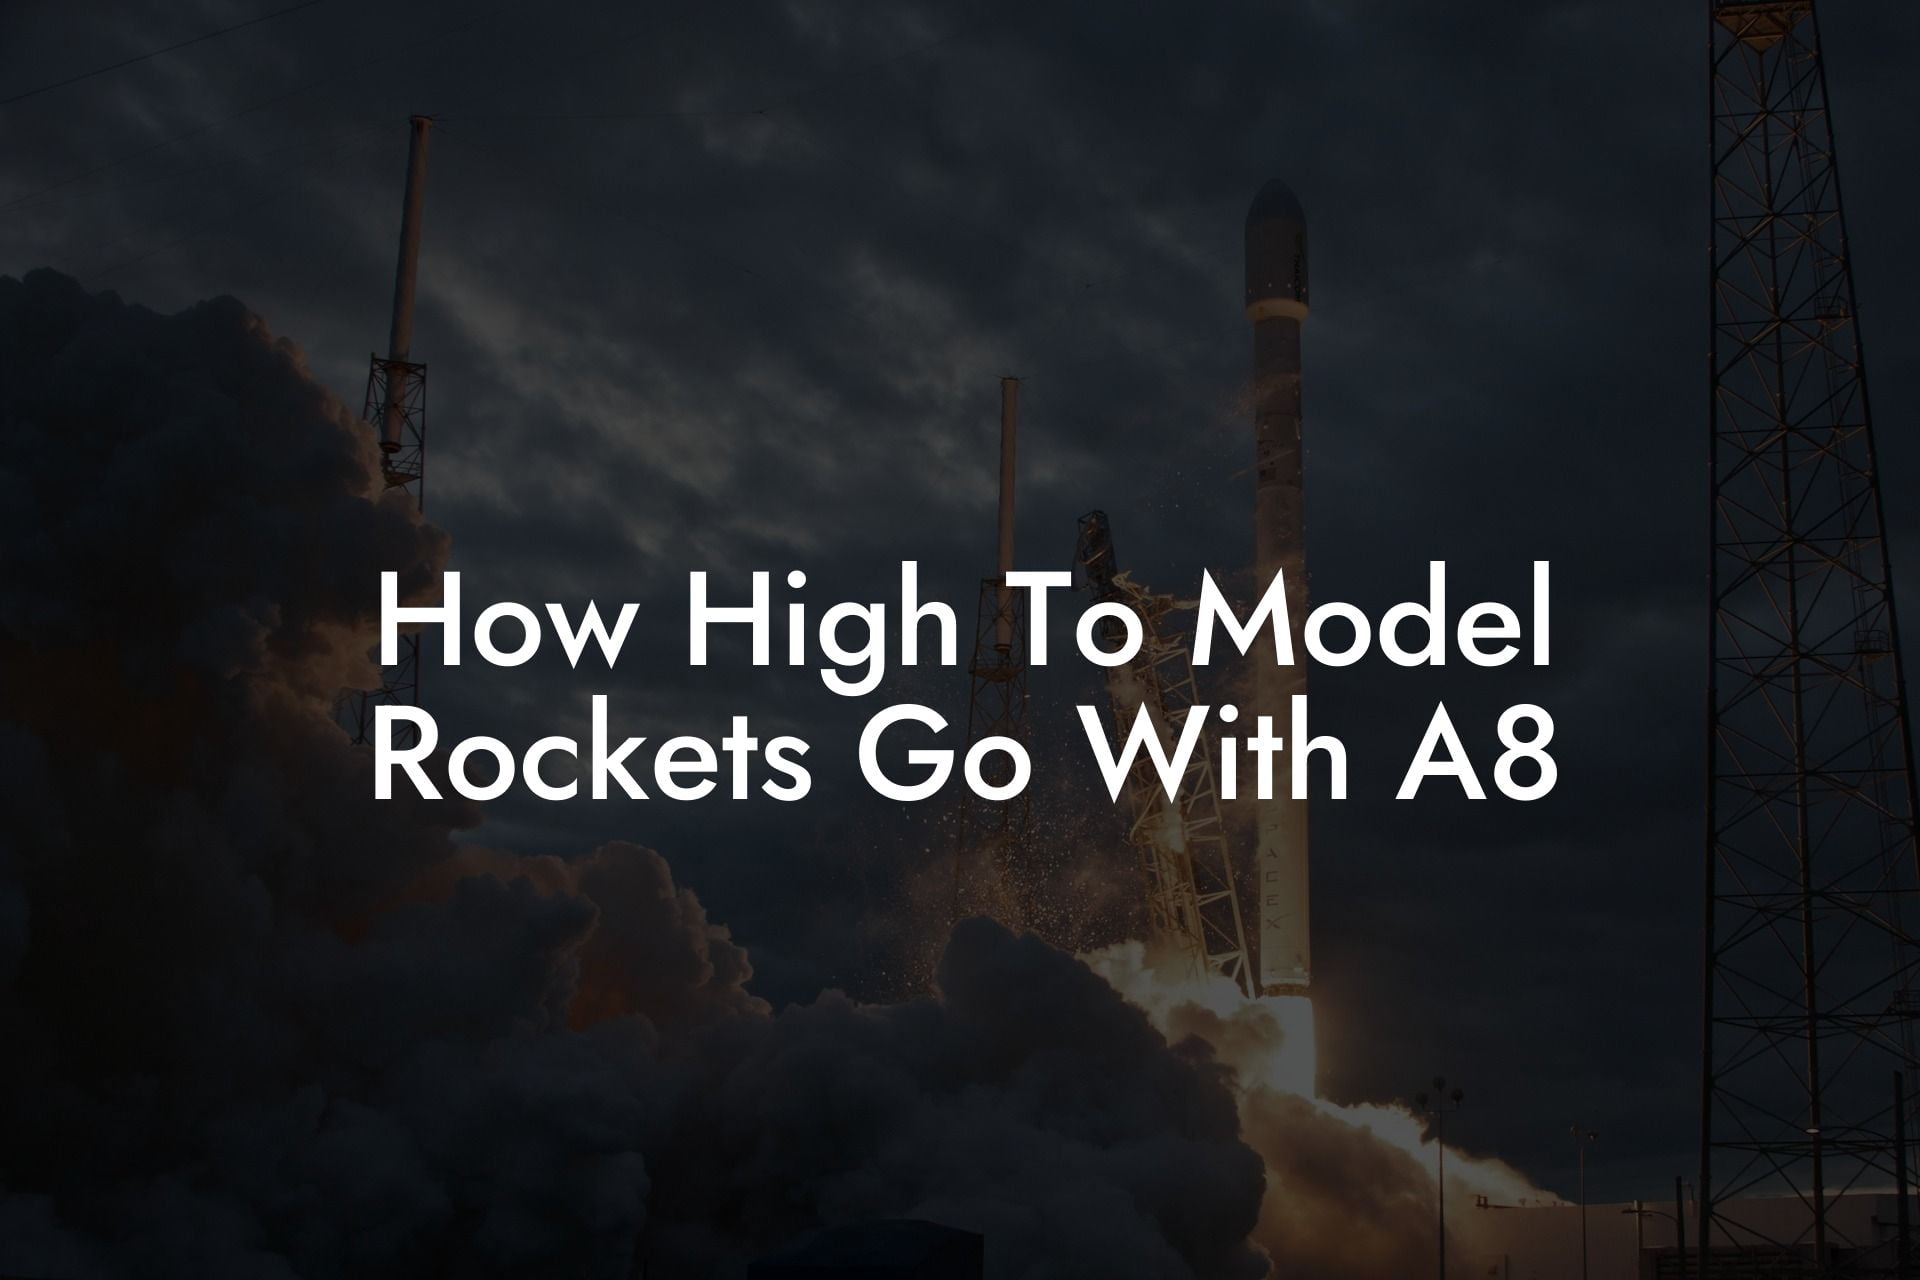 How High To Model Rockets Go With A8